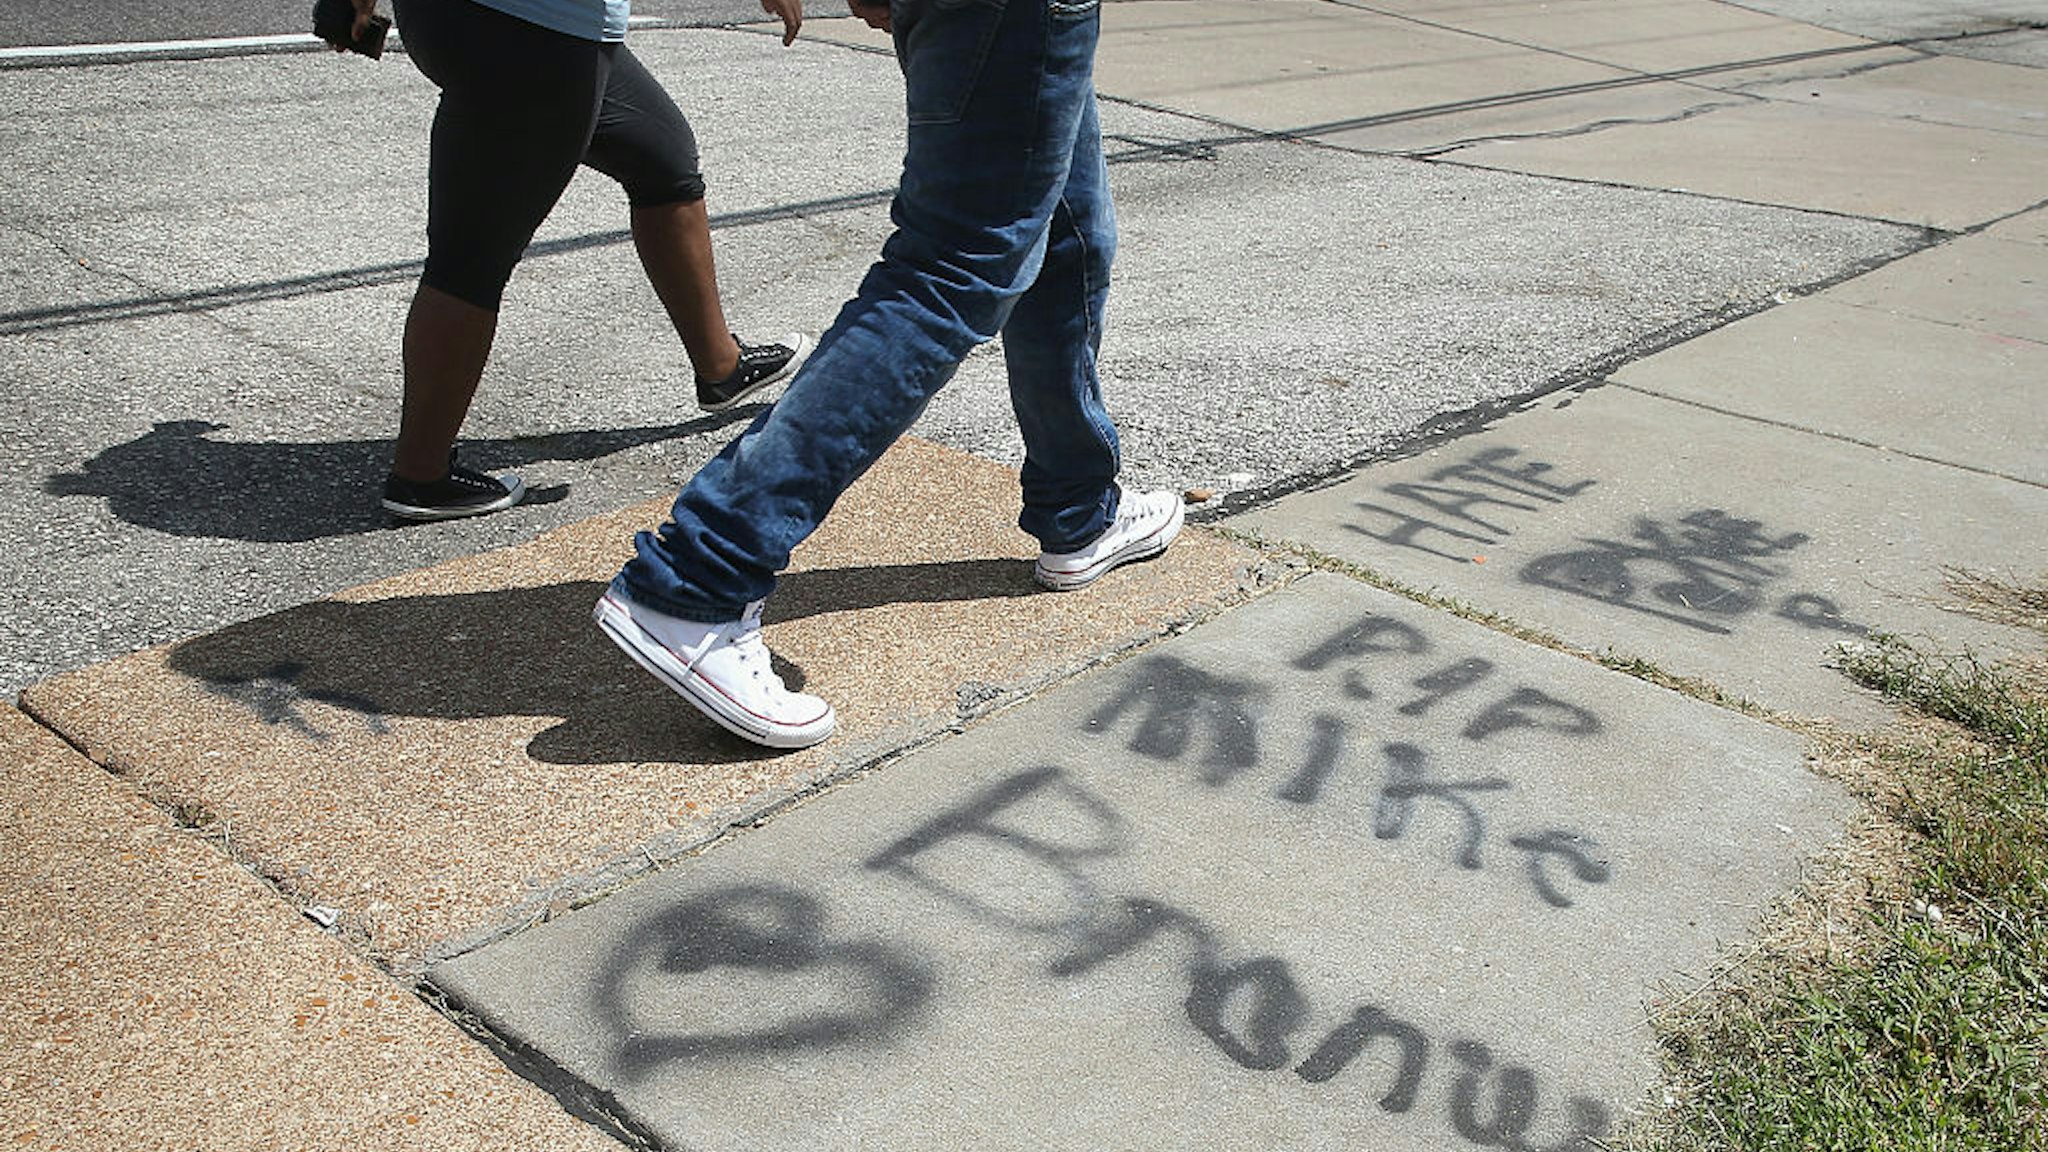 FERGUSON, MO - AUGUST 12: Graffiti remains on the sidewalk along West Florrisant Avenue one year after the shooting of Michael Brown on August 12, 2015 in Ferguson, Missouri. Brown was shot and killed by a Ferguson police officer on August 9, 2014. (Photo by Scott Olson/Getty Images)